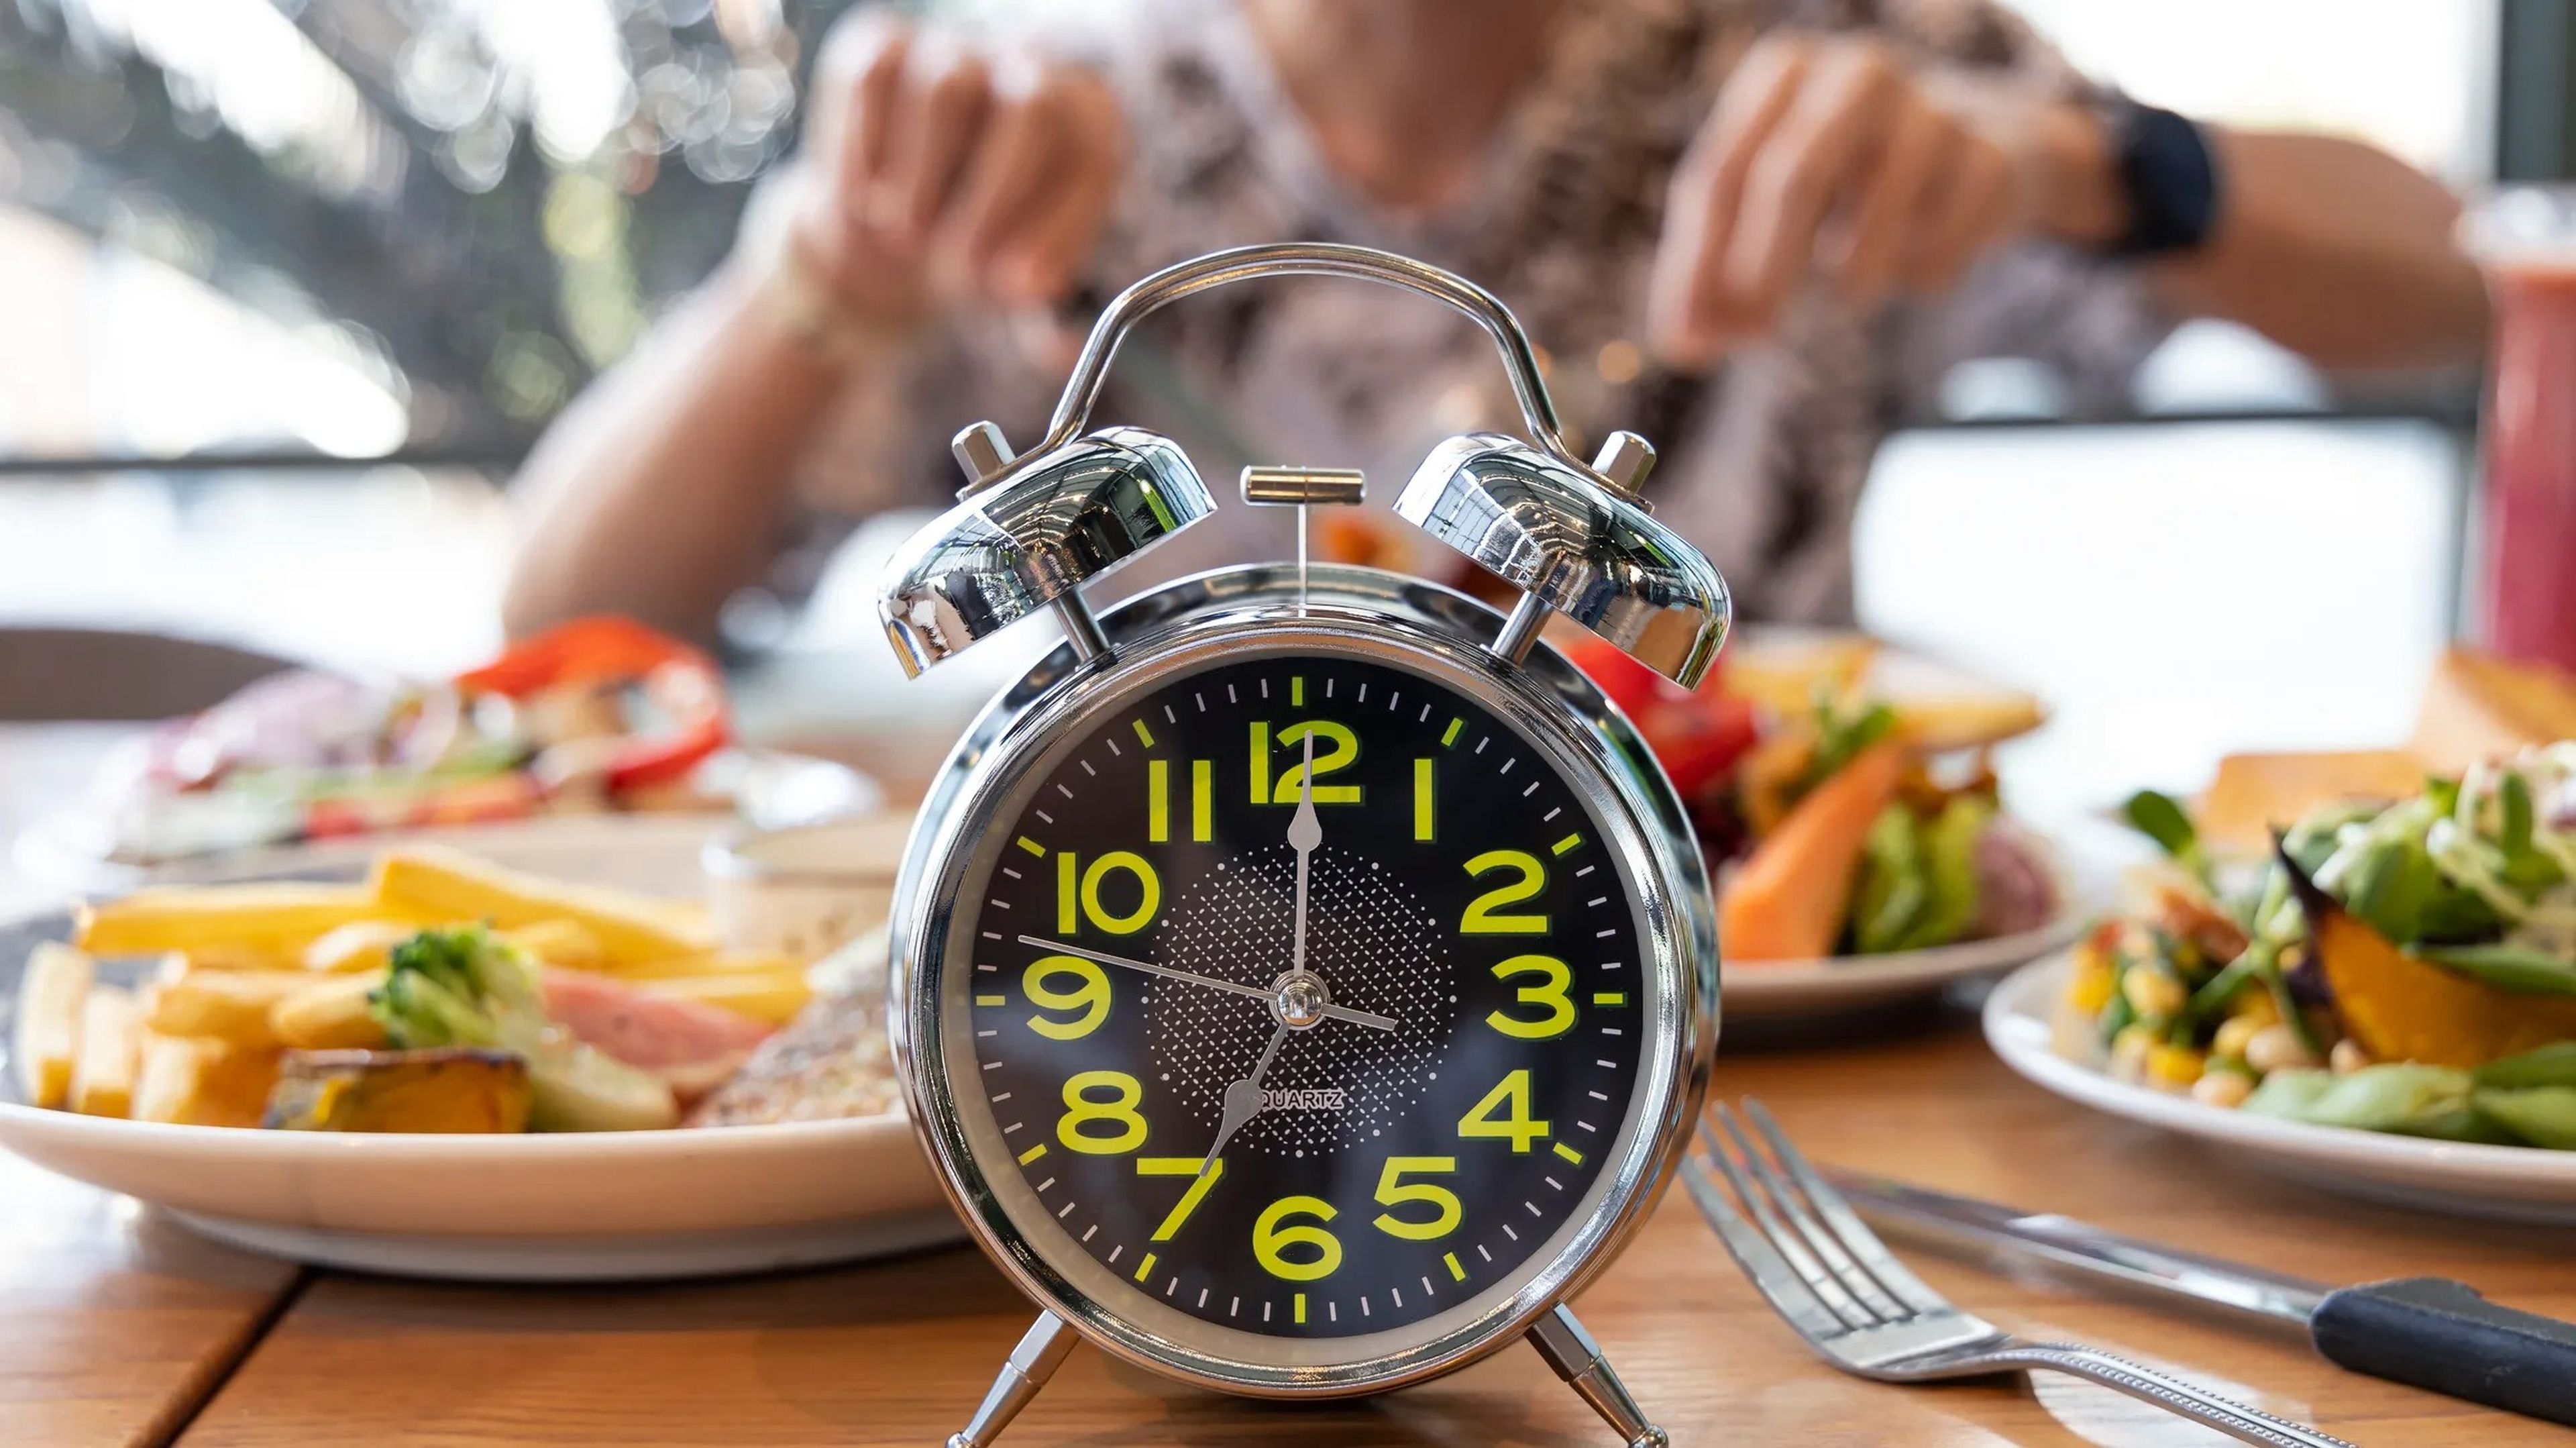 An alarm clock in front of a dinner table full of food with a person in the background preparing to eat on an intermittent fasting schedule.